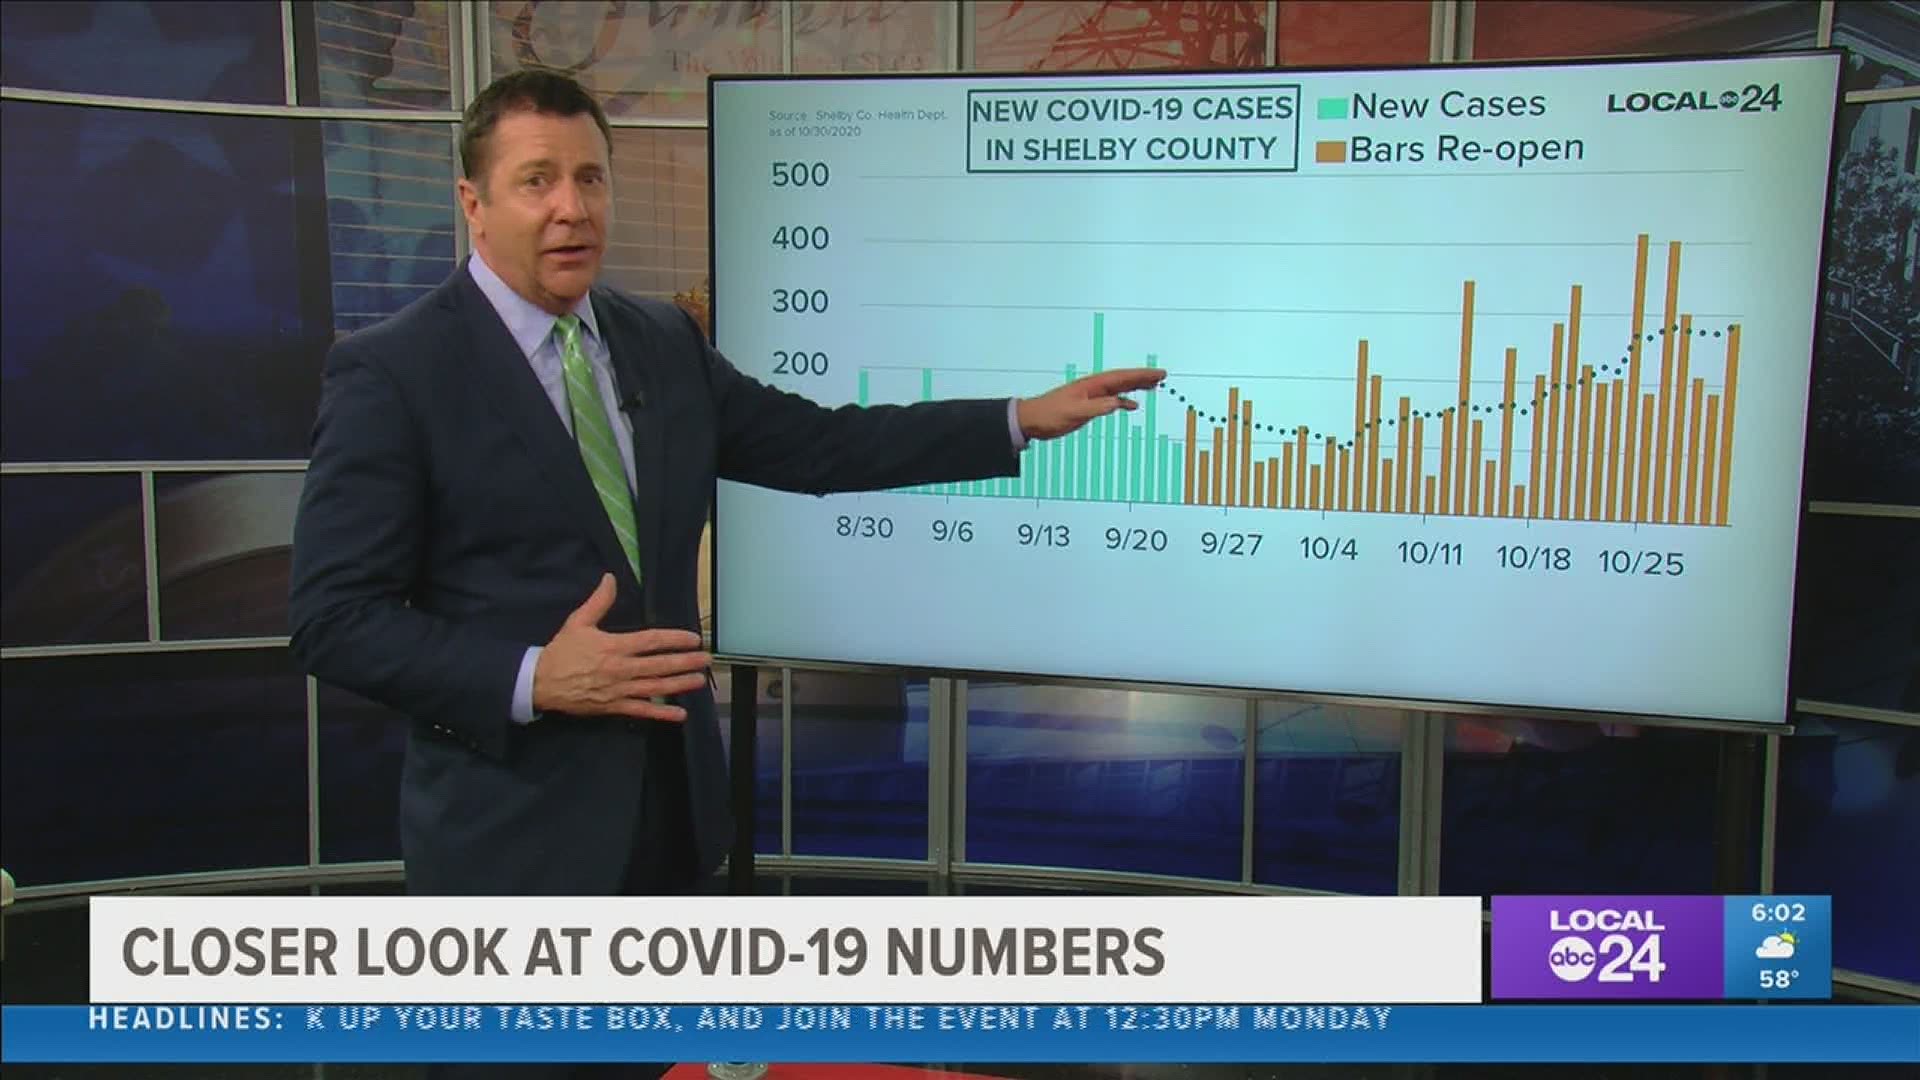 Local 24 News Richard Ransom is breaking down the latest COVID-19 data in Memphis & the Mid-South